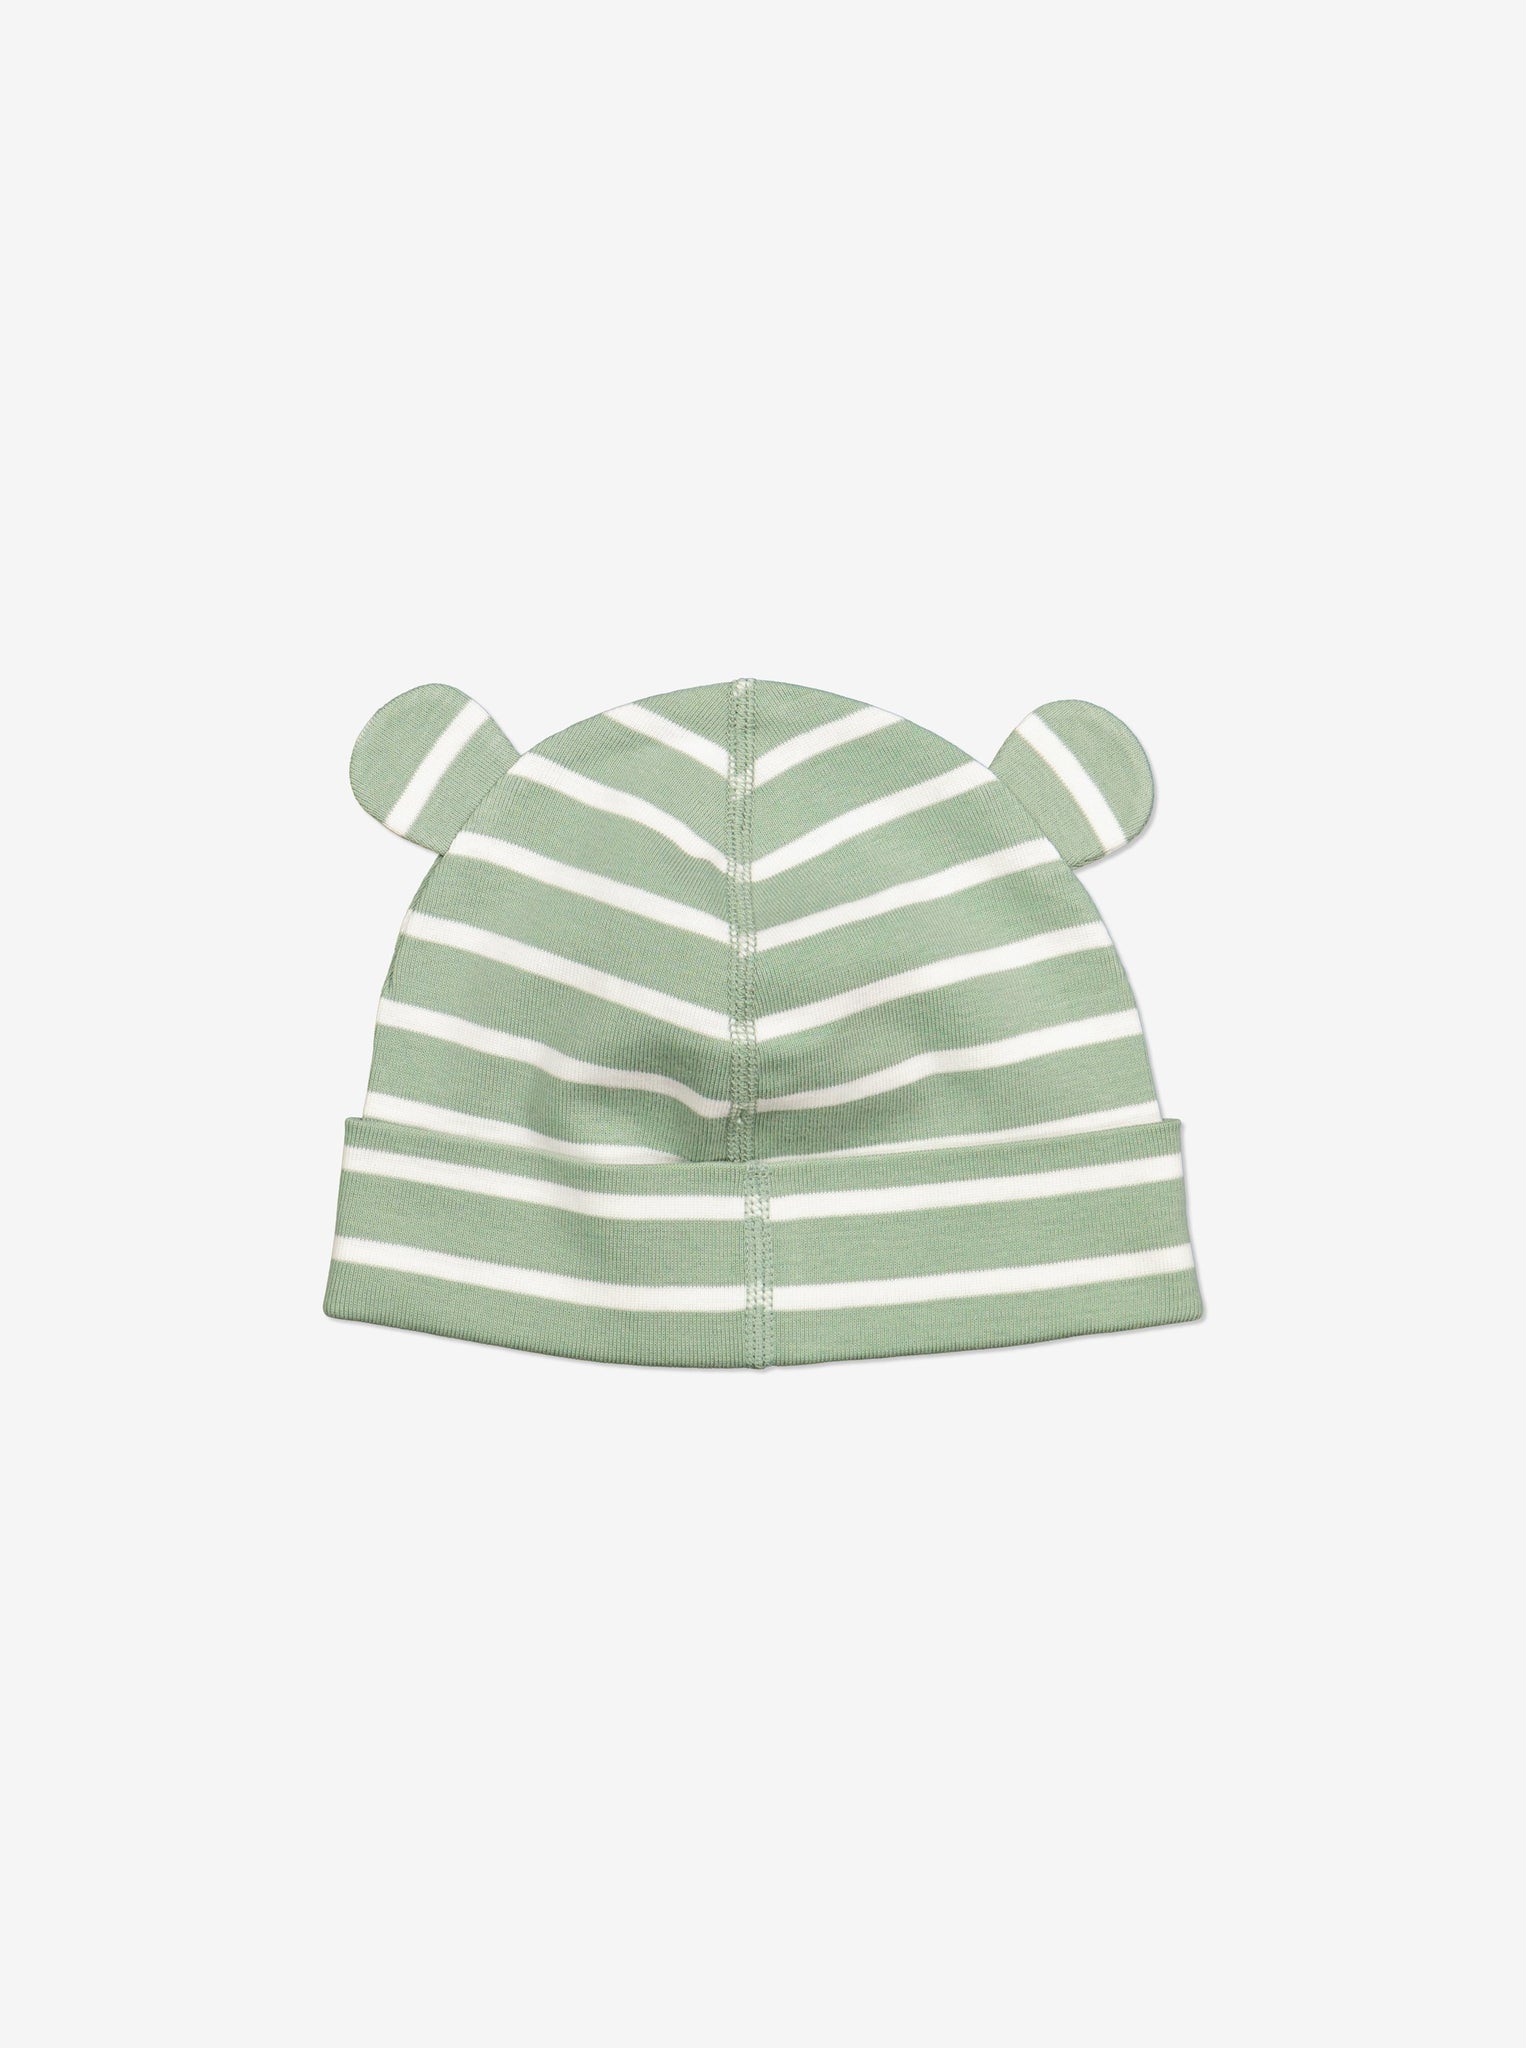  Organic Green Baby Beanie Hat from Polarn O. Pyret Kidswear. Made with 100% organic cotton.